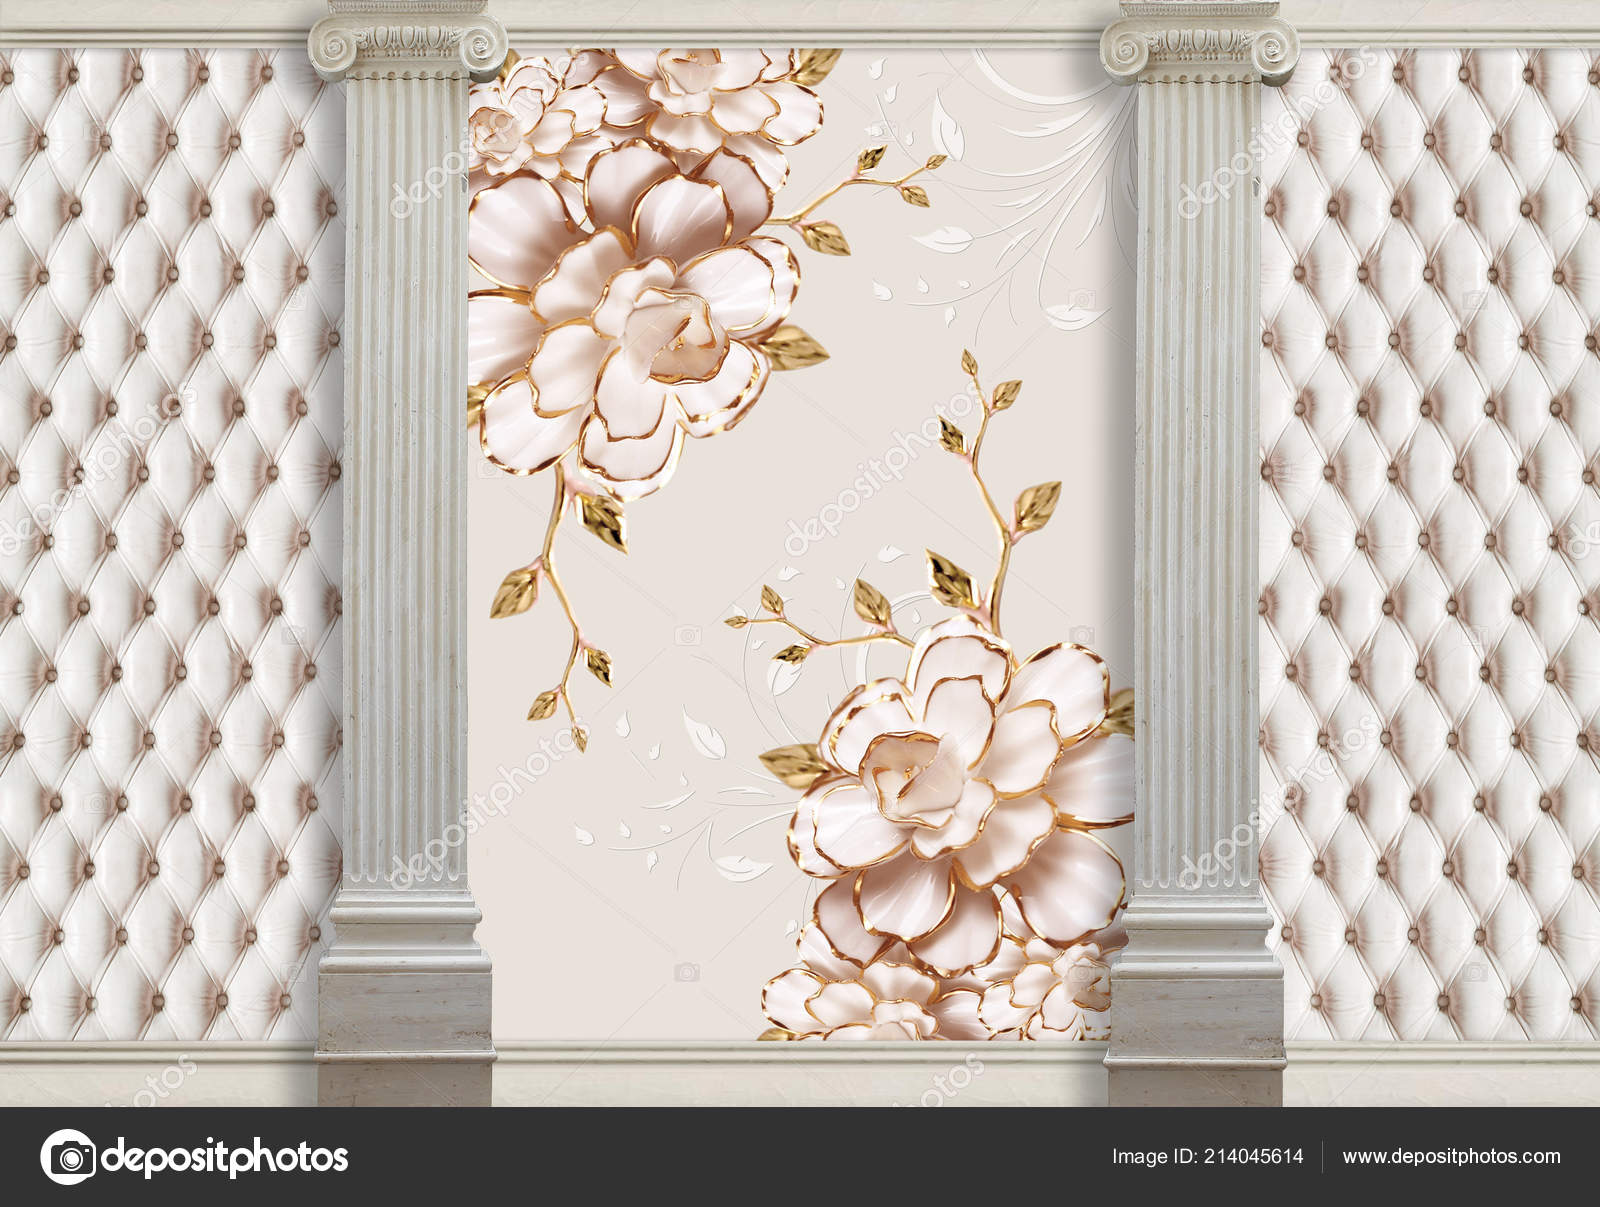 Modern Ideas Design Any Interior Wallpapers Columns Porcelain Flowers  Effect Stock Photo by ©Di-VNA 214045614